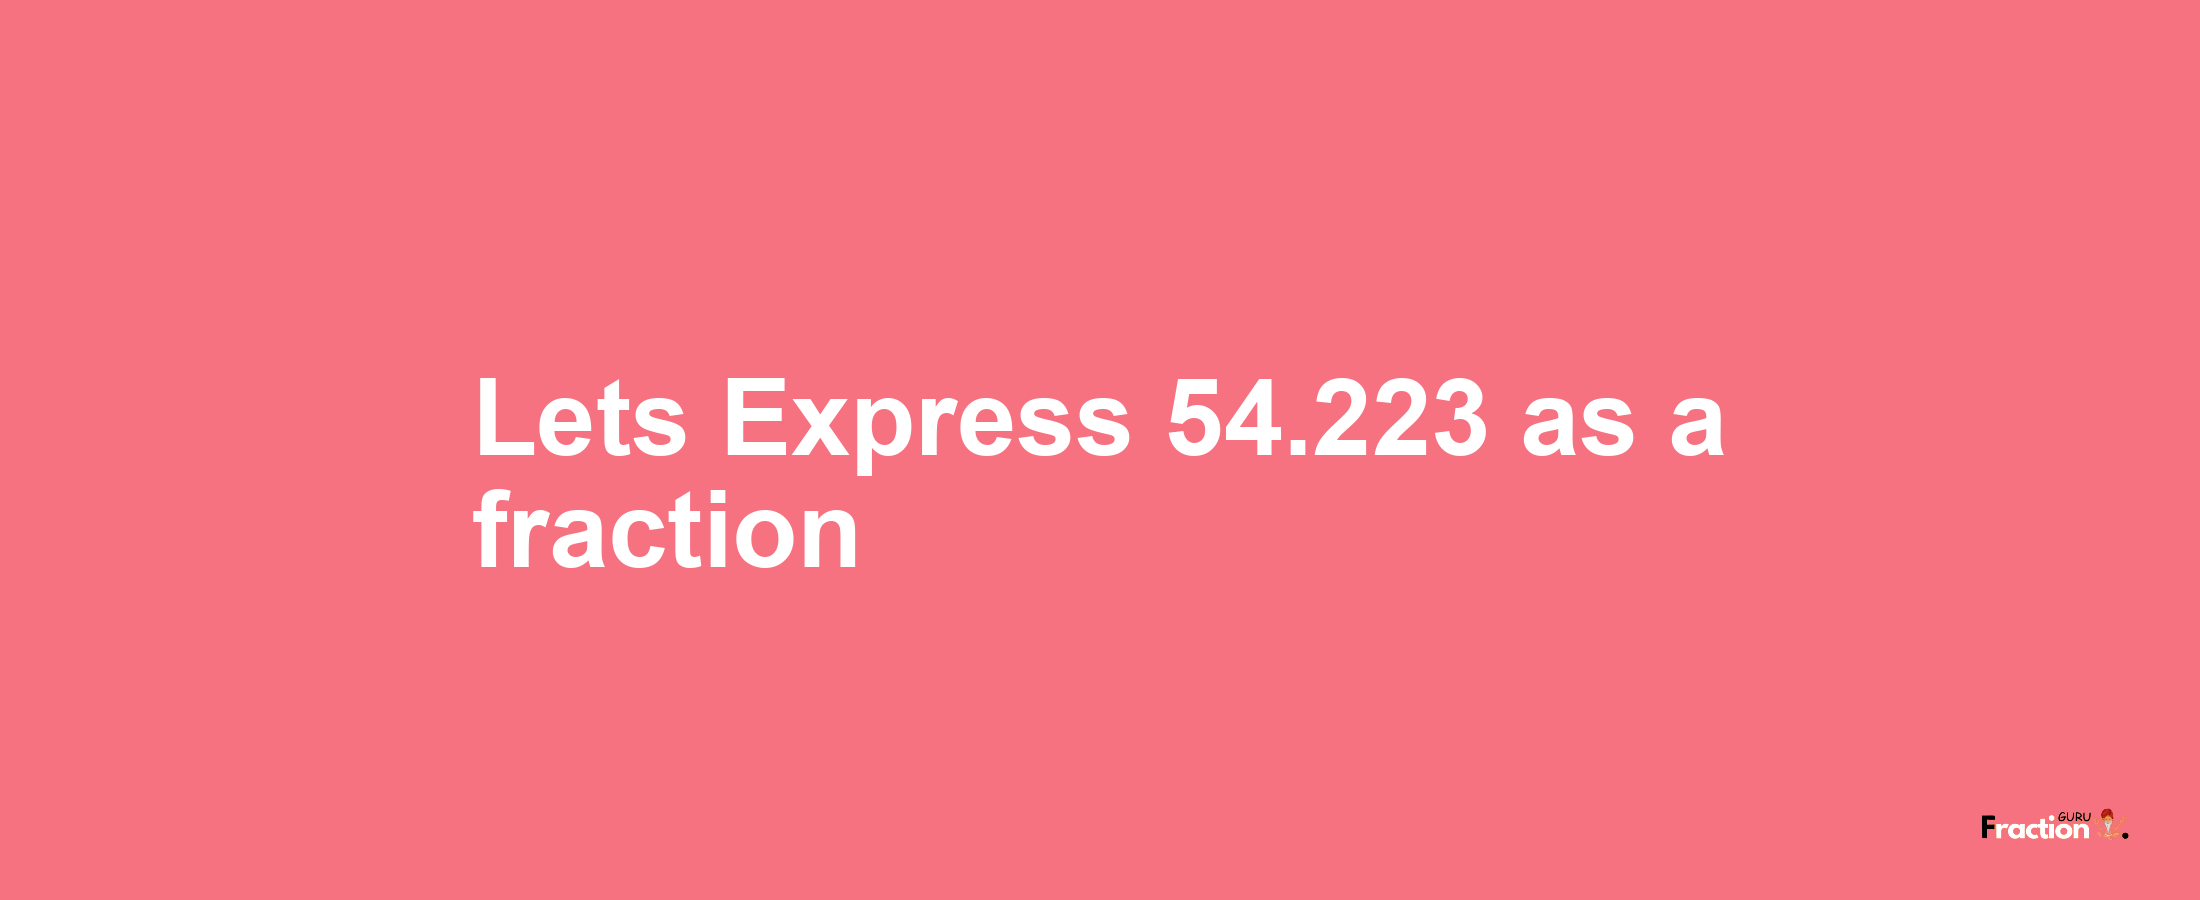 Lets Express 54.223 as afraction